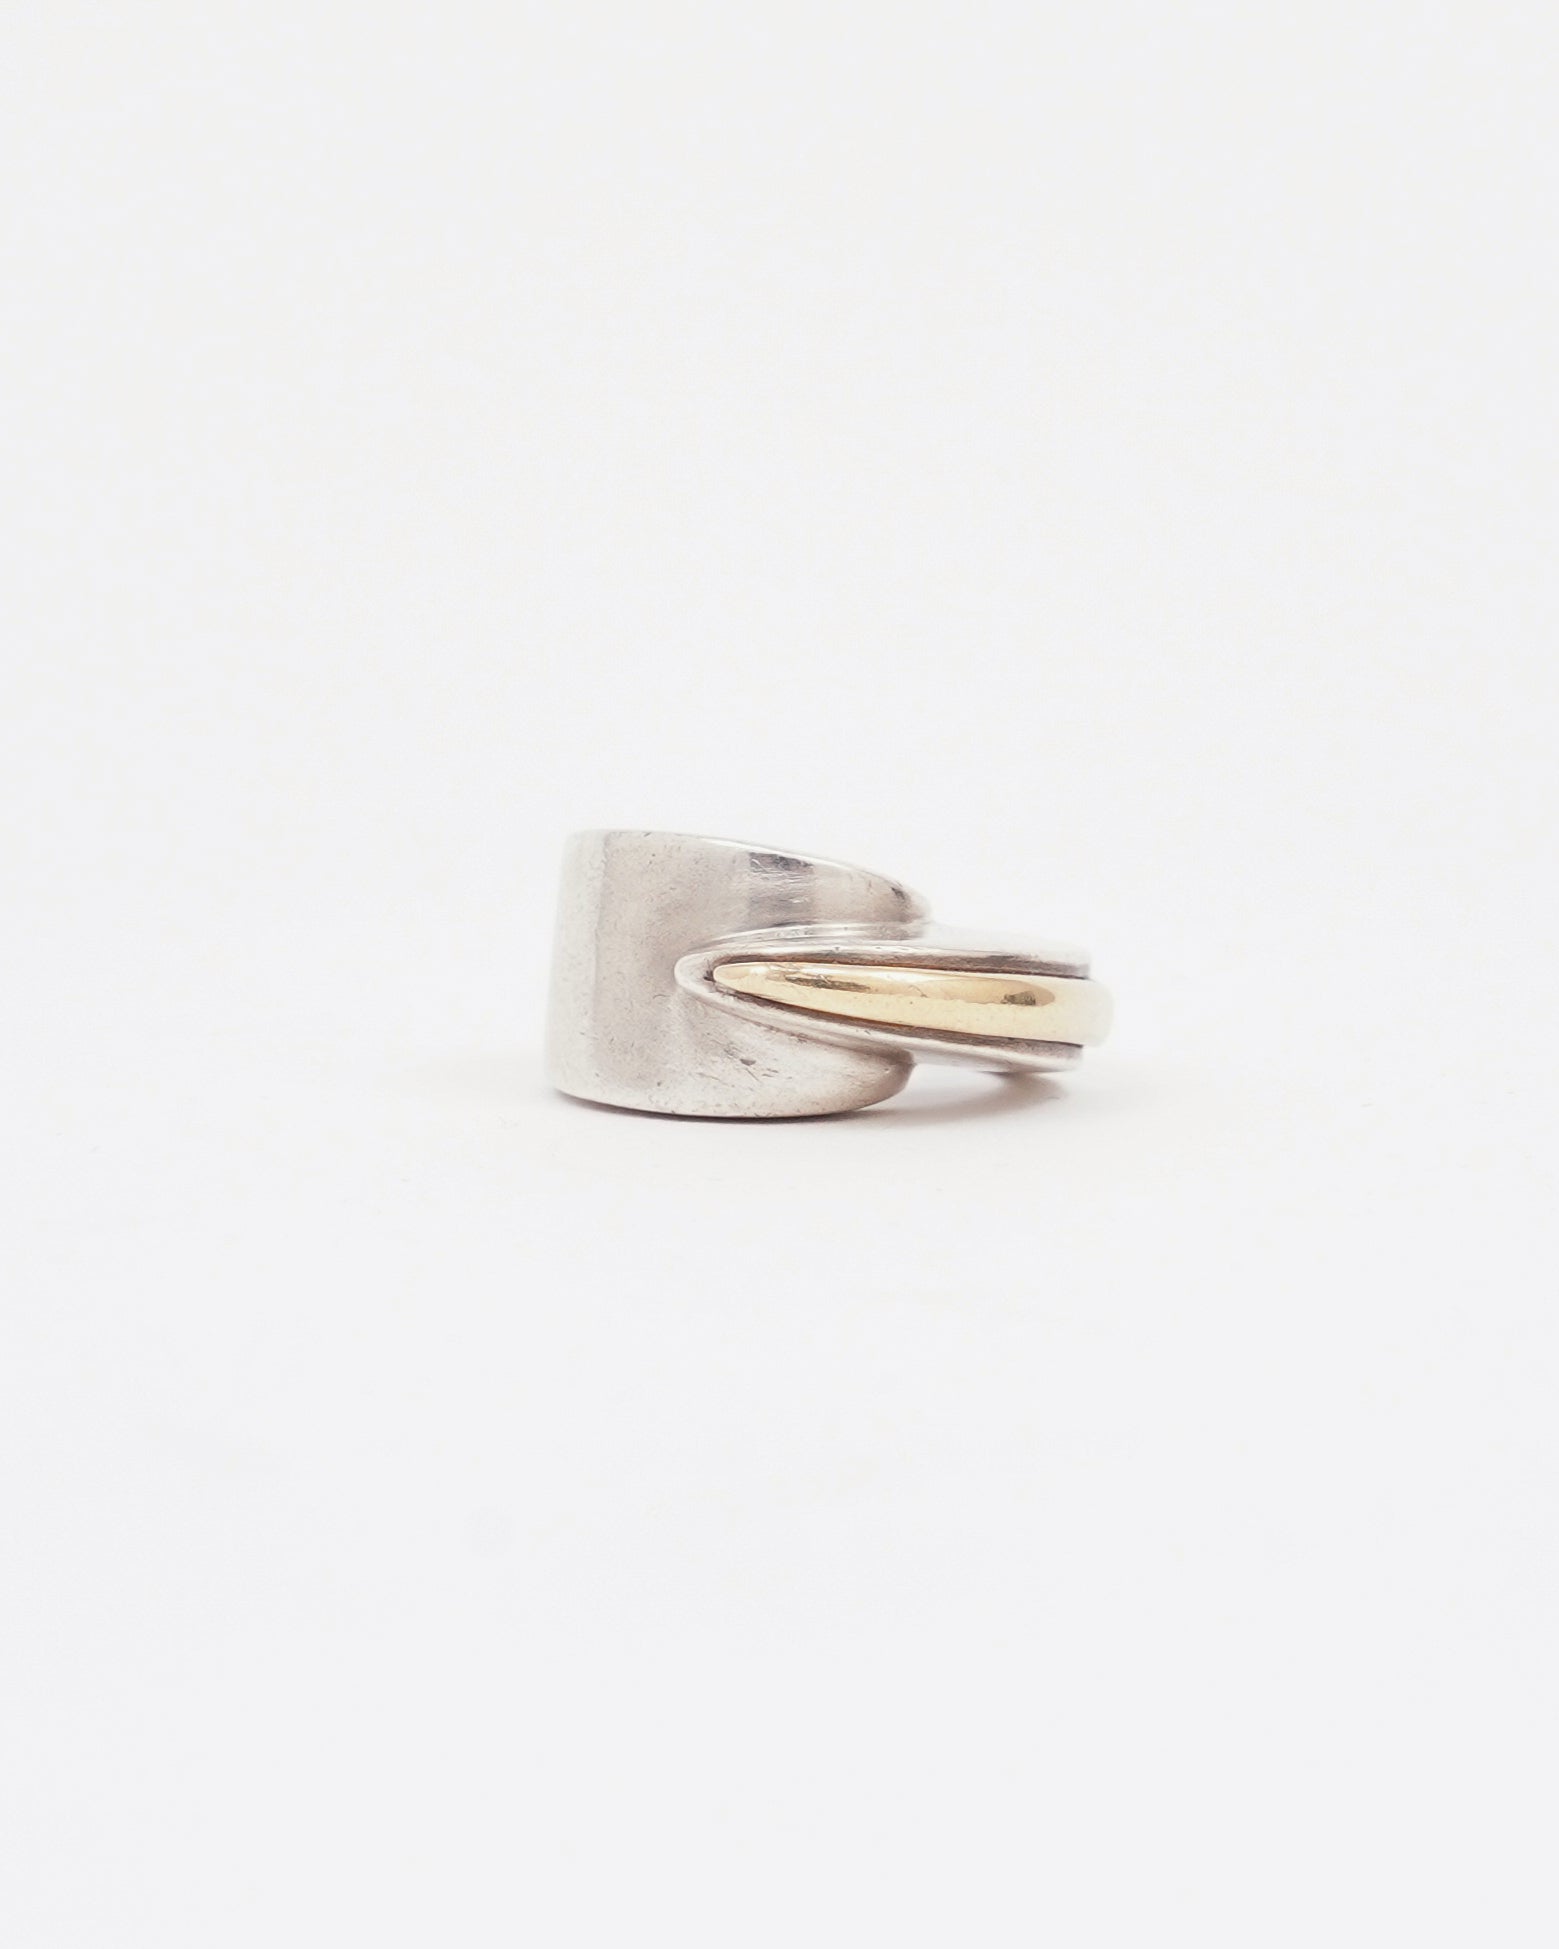 Silver Ring: Size8